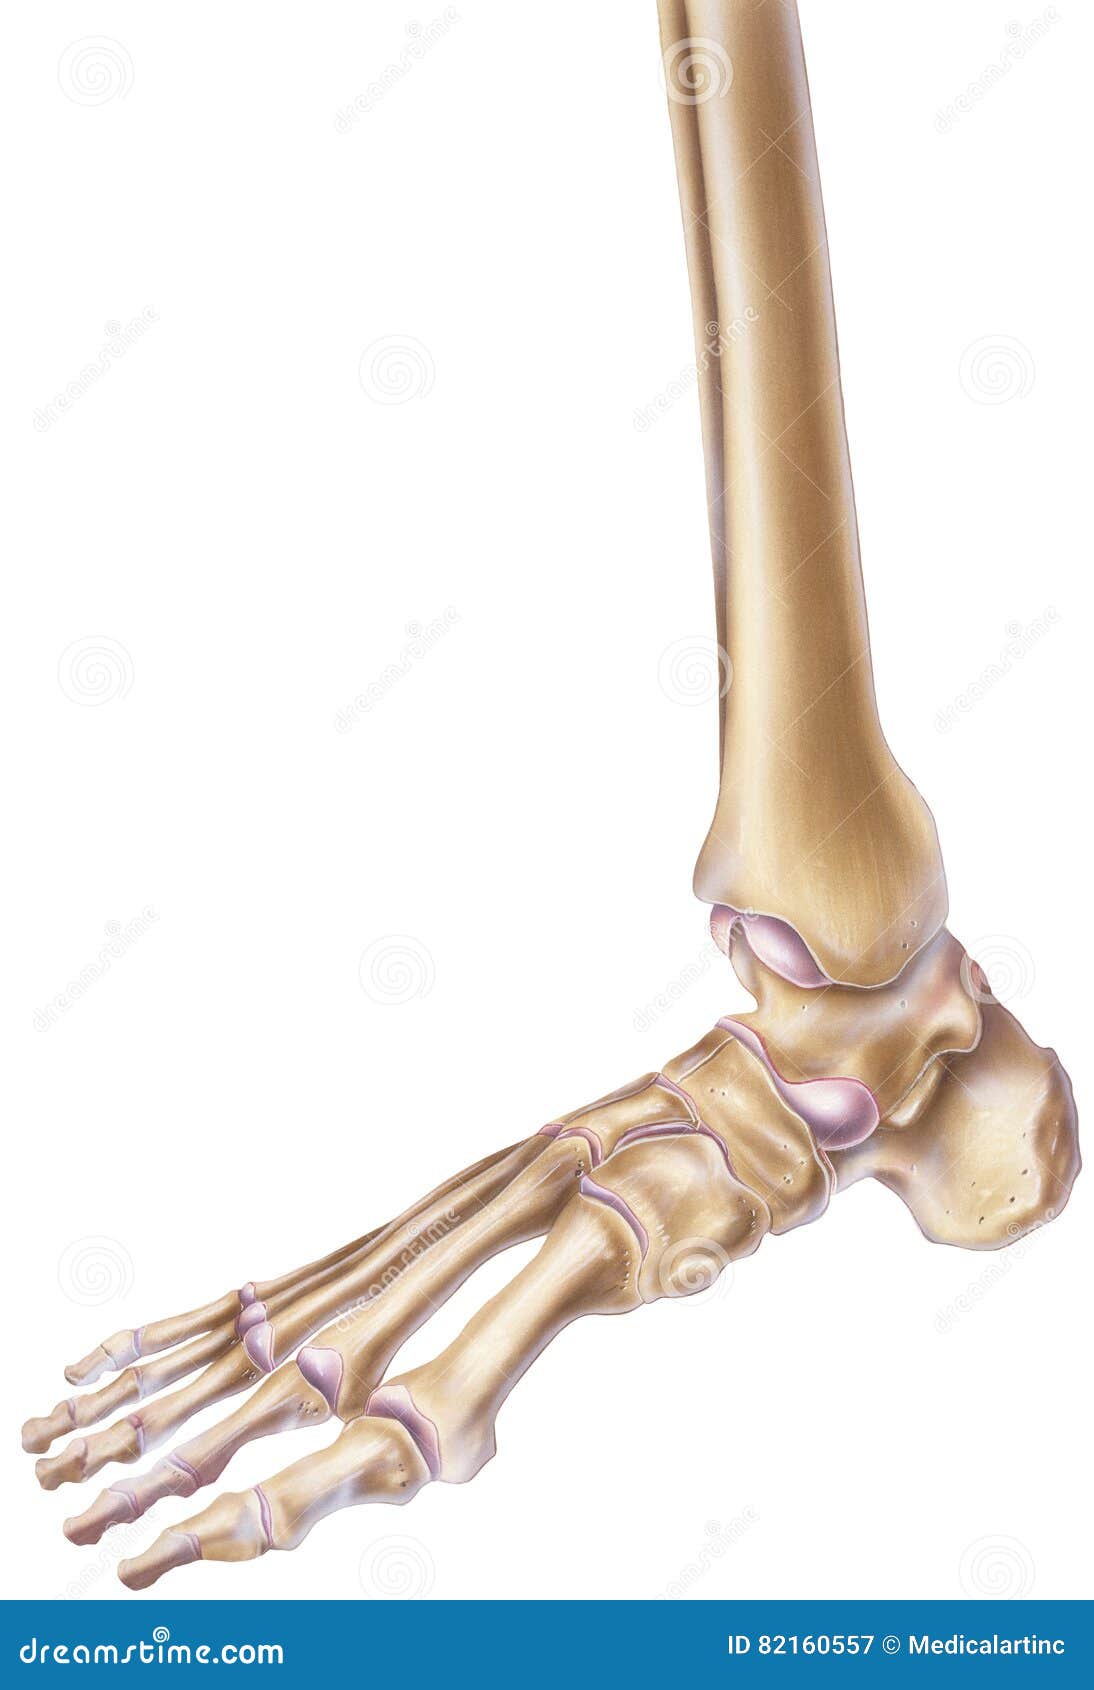 foot and ankle - bones & joints